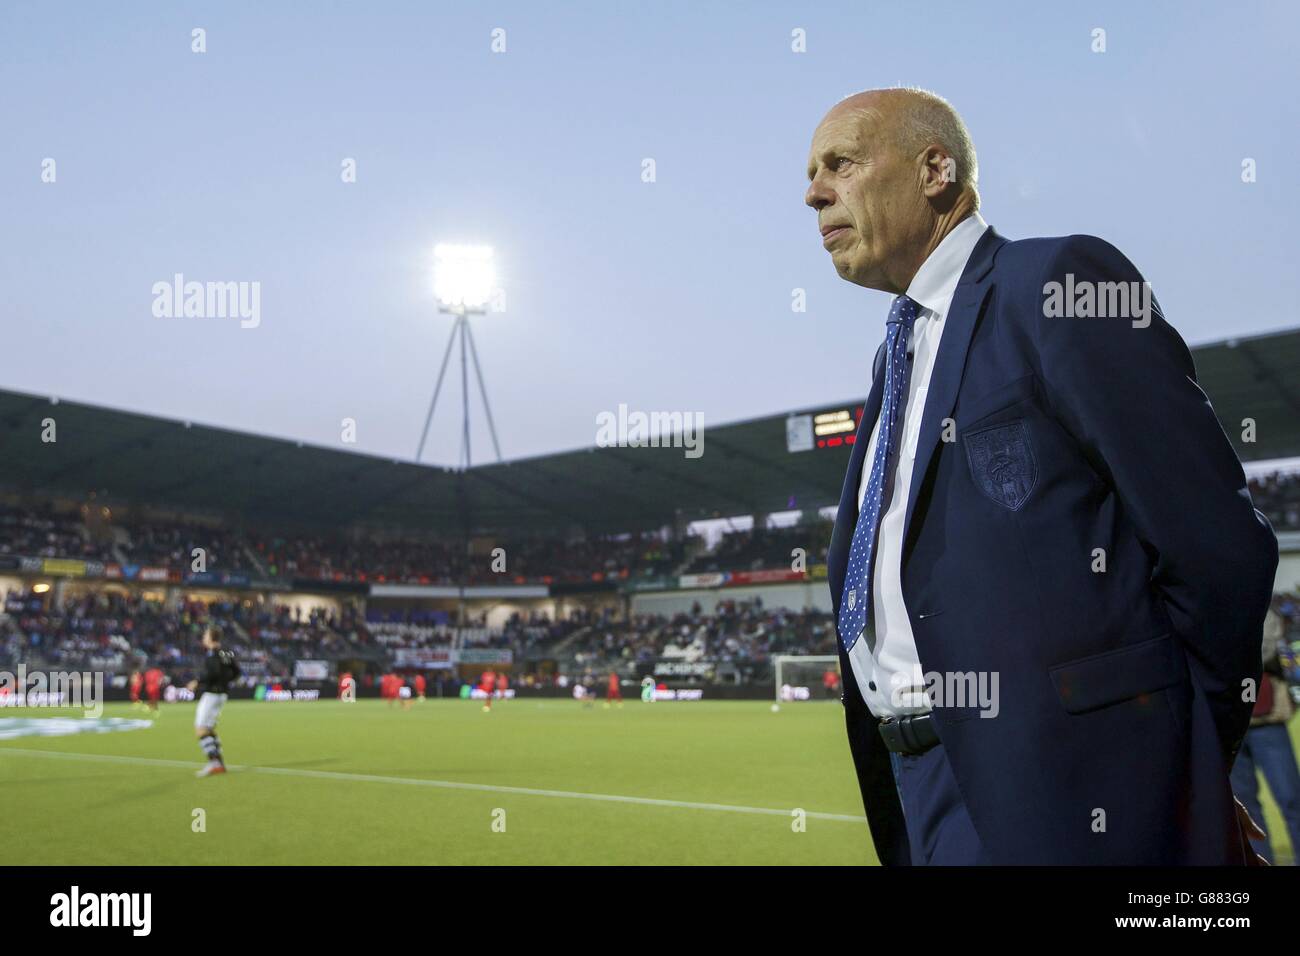 chairman Jan Smit of Heracles Almelo during the Dutch Eredivisie match between Heracles Almelo and FC Twente at Polman stadium on August 29, 2015 in Almelo, The Netherlands Stock Photo